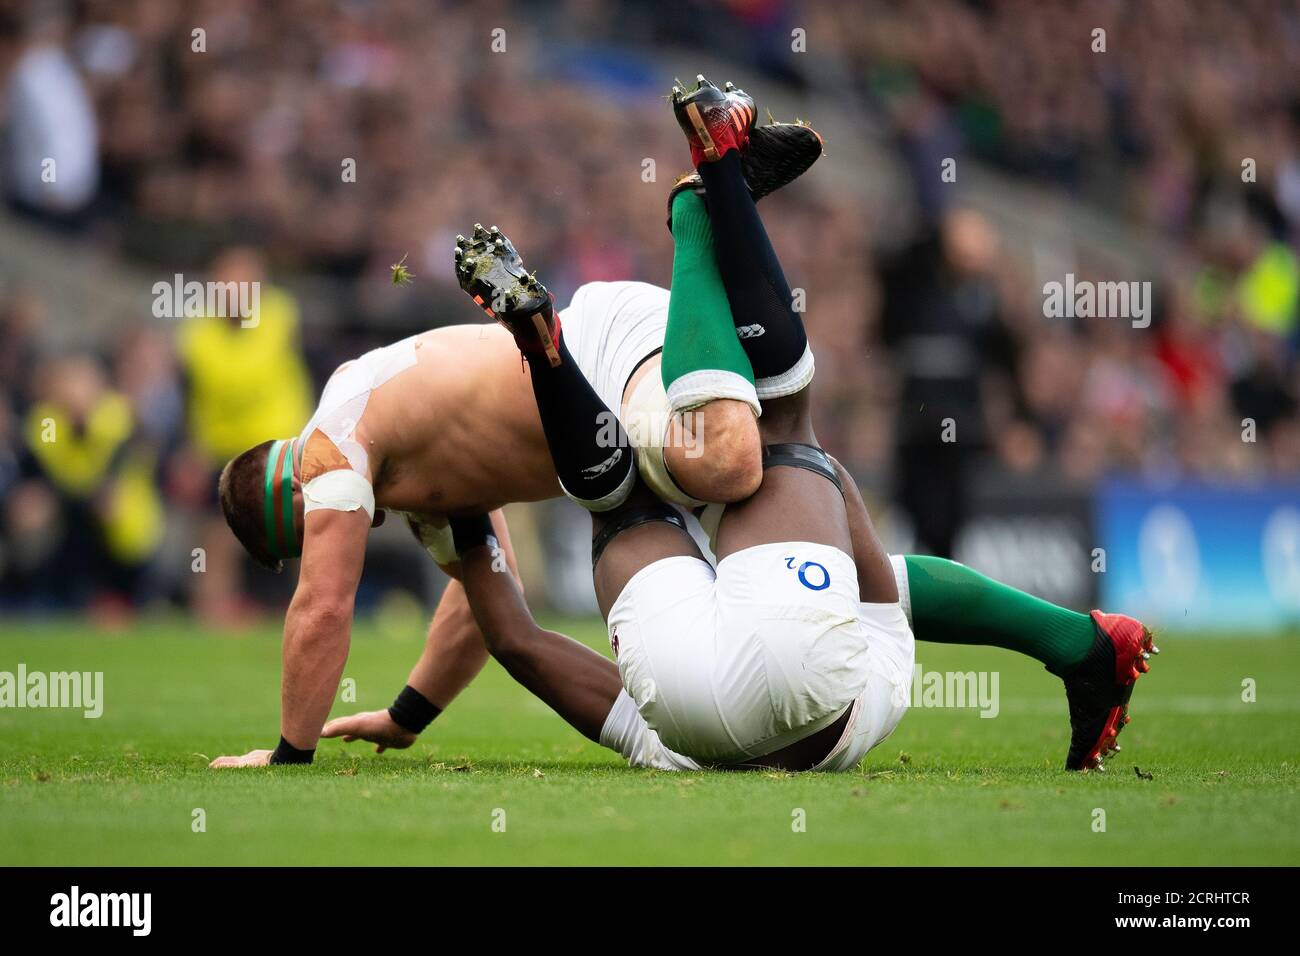 England's Maro Itoje clashes with CJ Stander who losres his shirt   PHOTO CREDIT : © MARK PAIN / ALAMY STOCK PHOTO Stock Photo